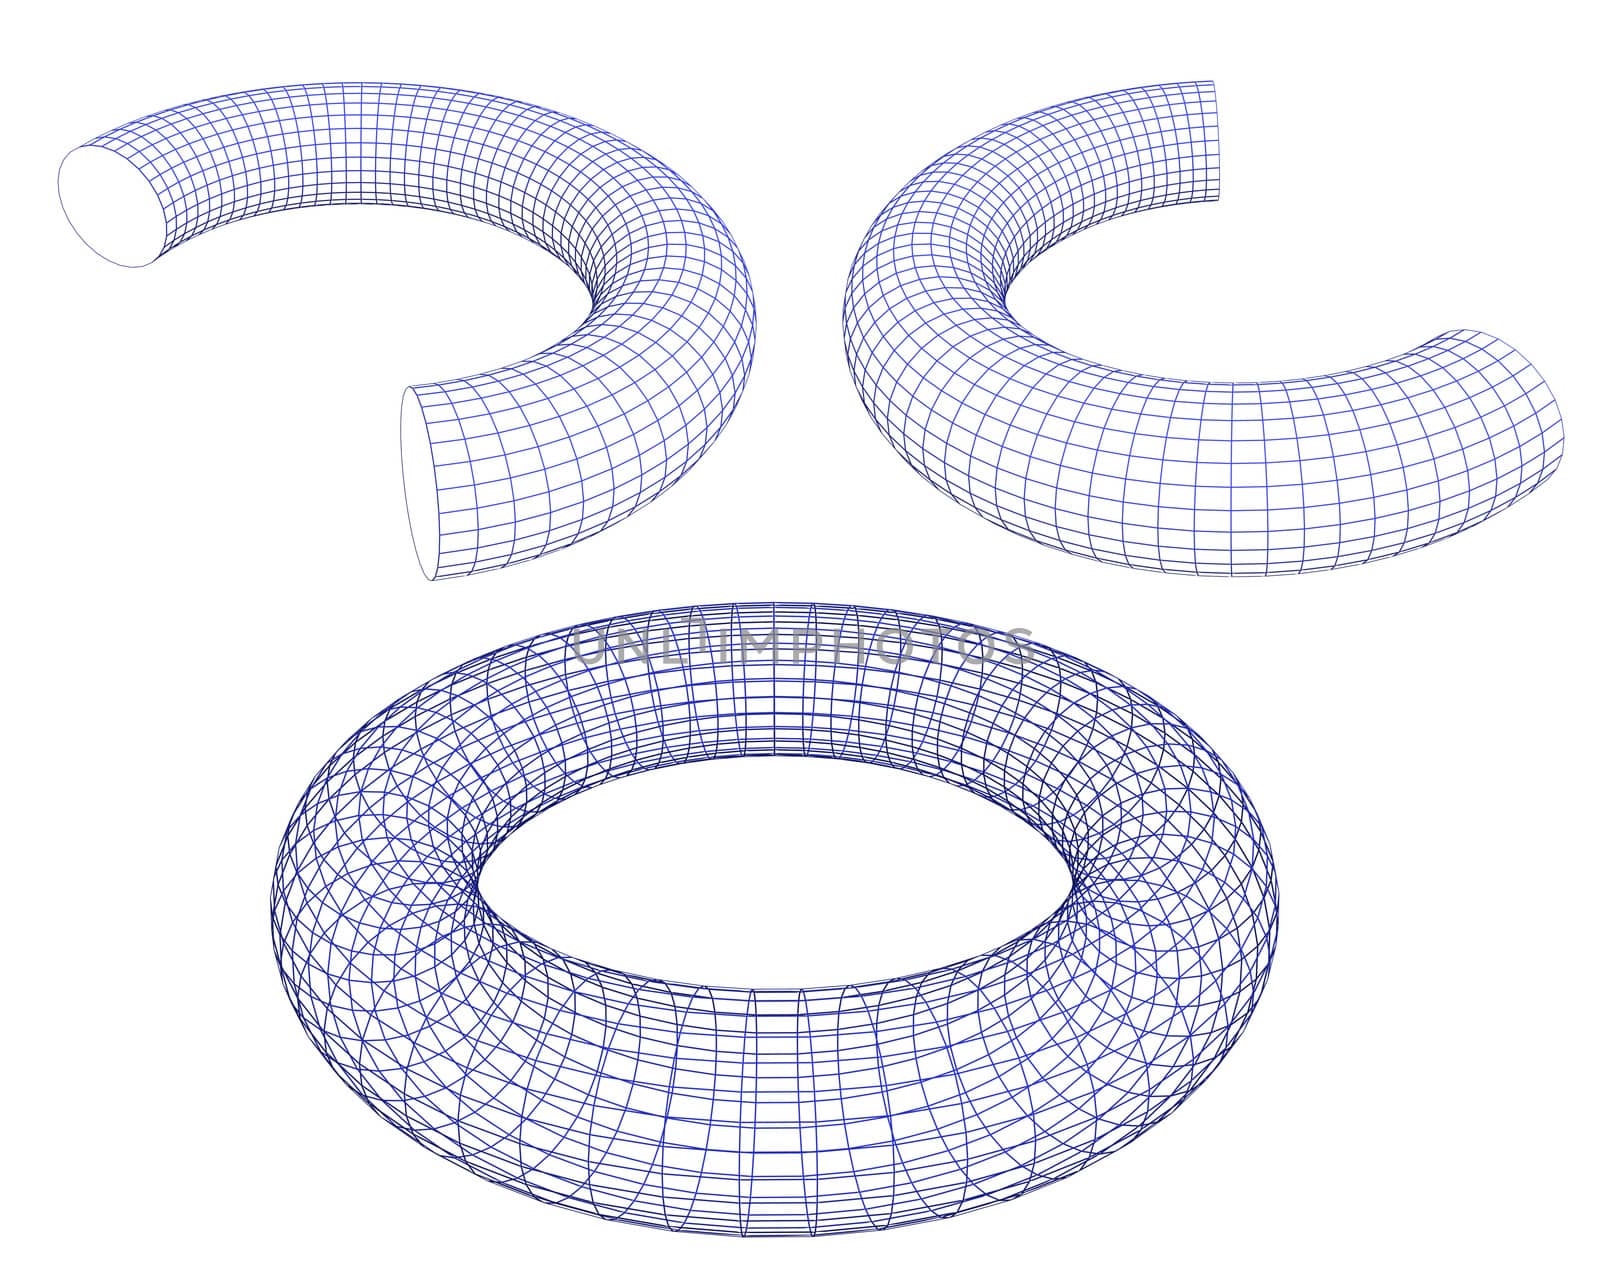 3d torus shapes  wireframe ready for editing and simple for every design  isolated on white background